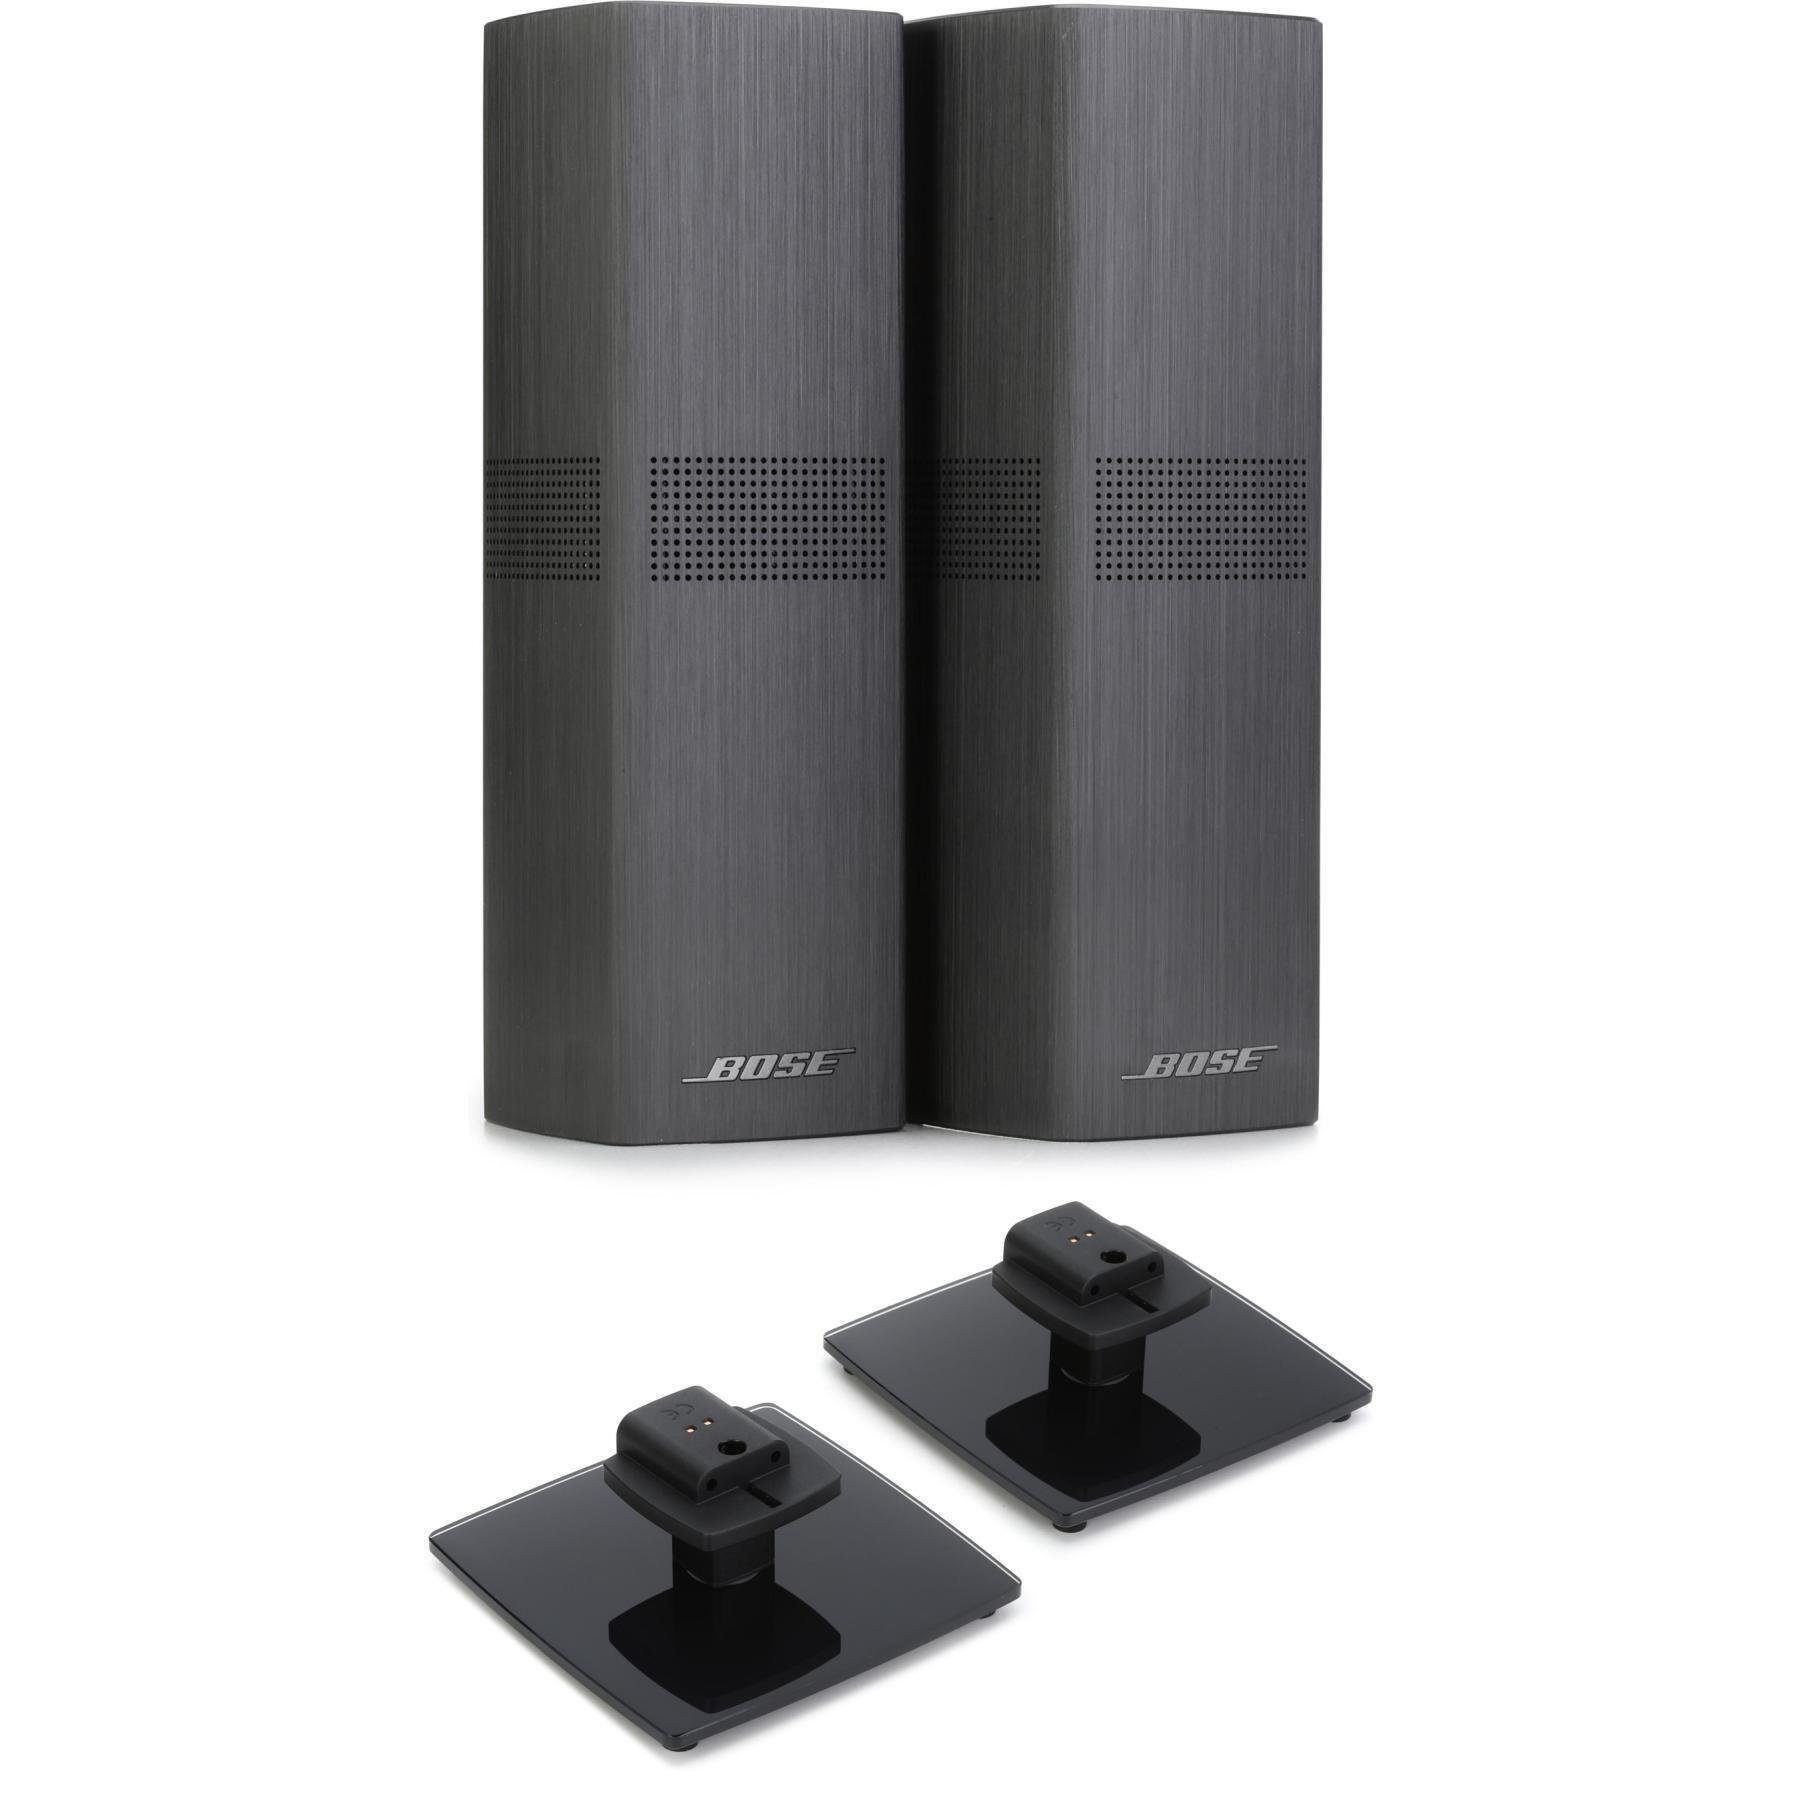 Bose Surround Speakers 700 with Table Stands - Black